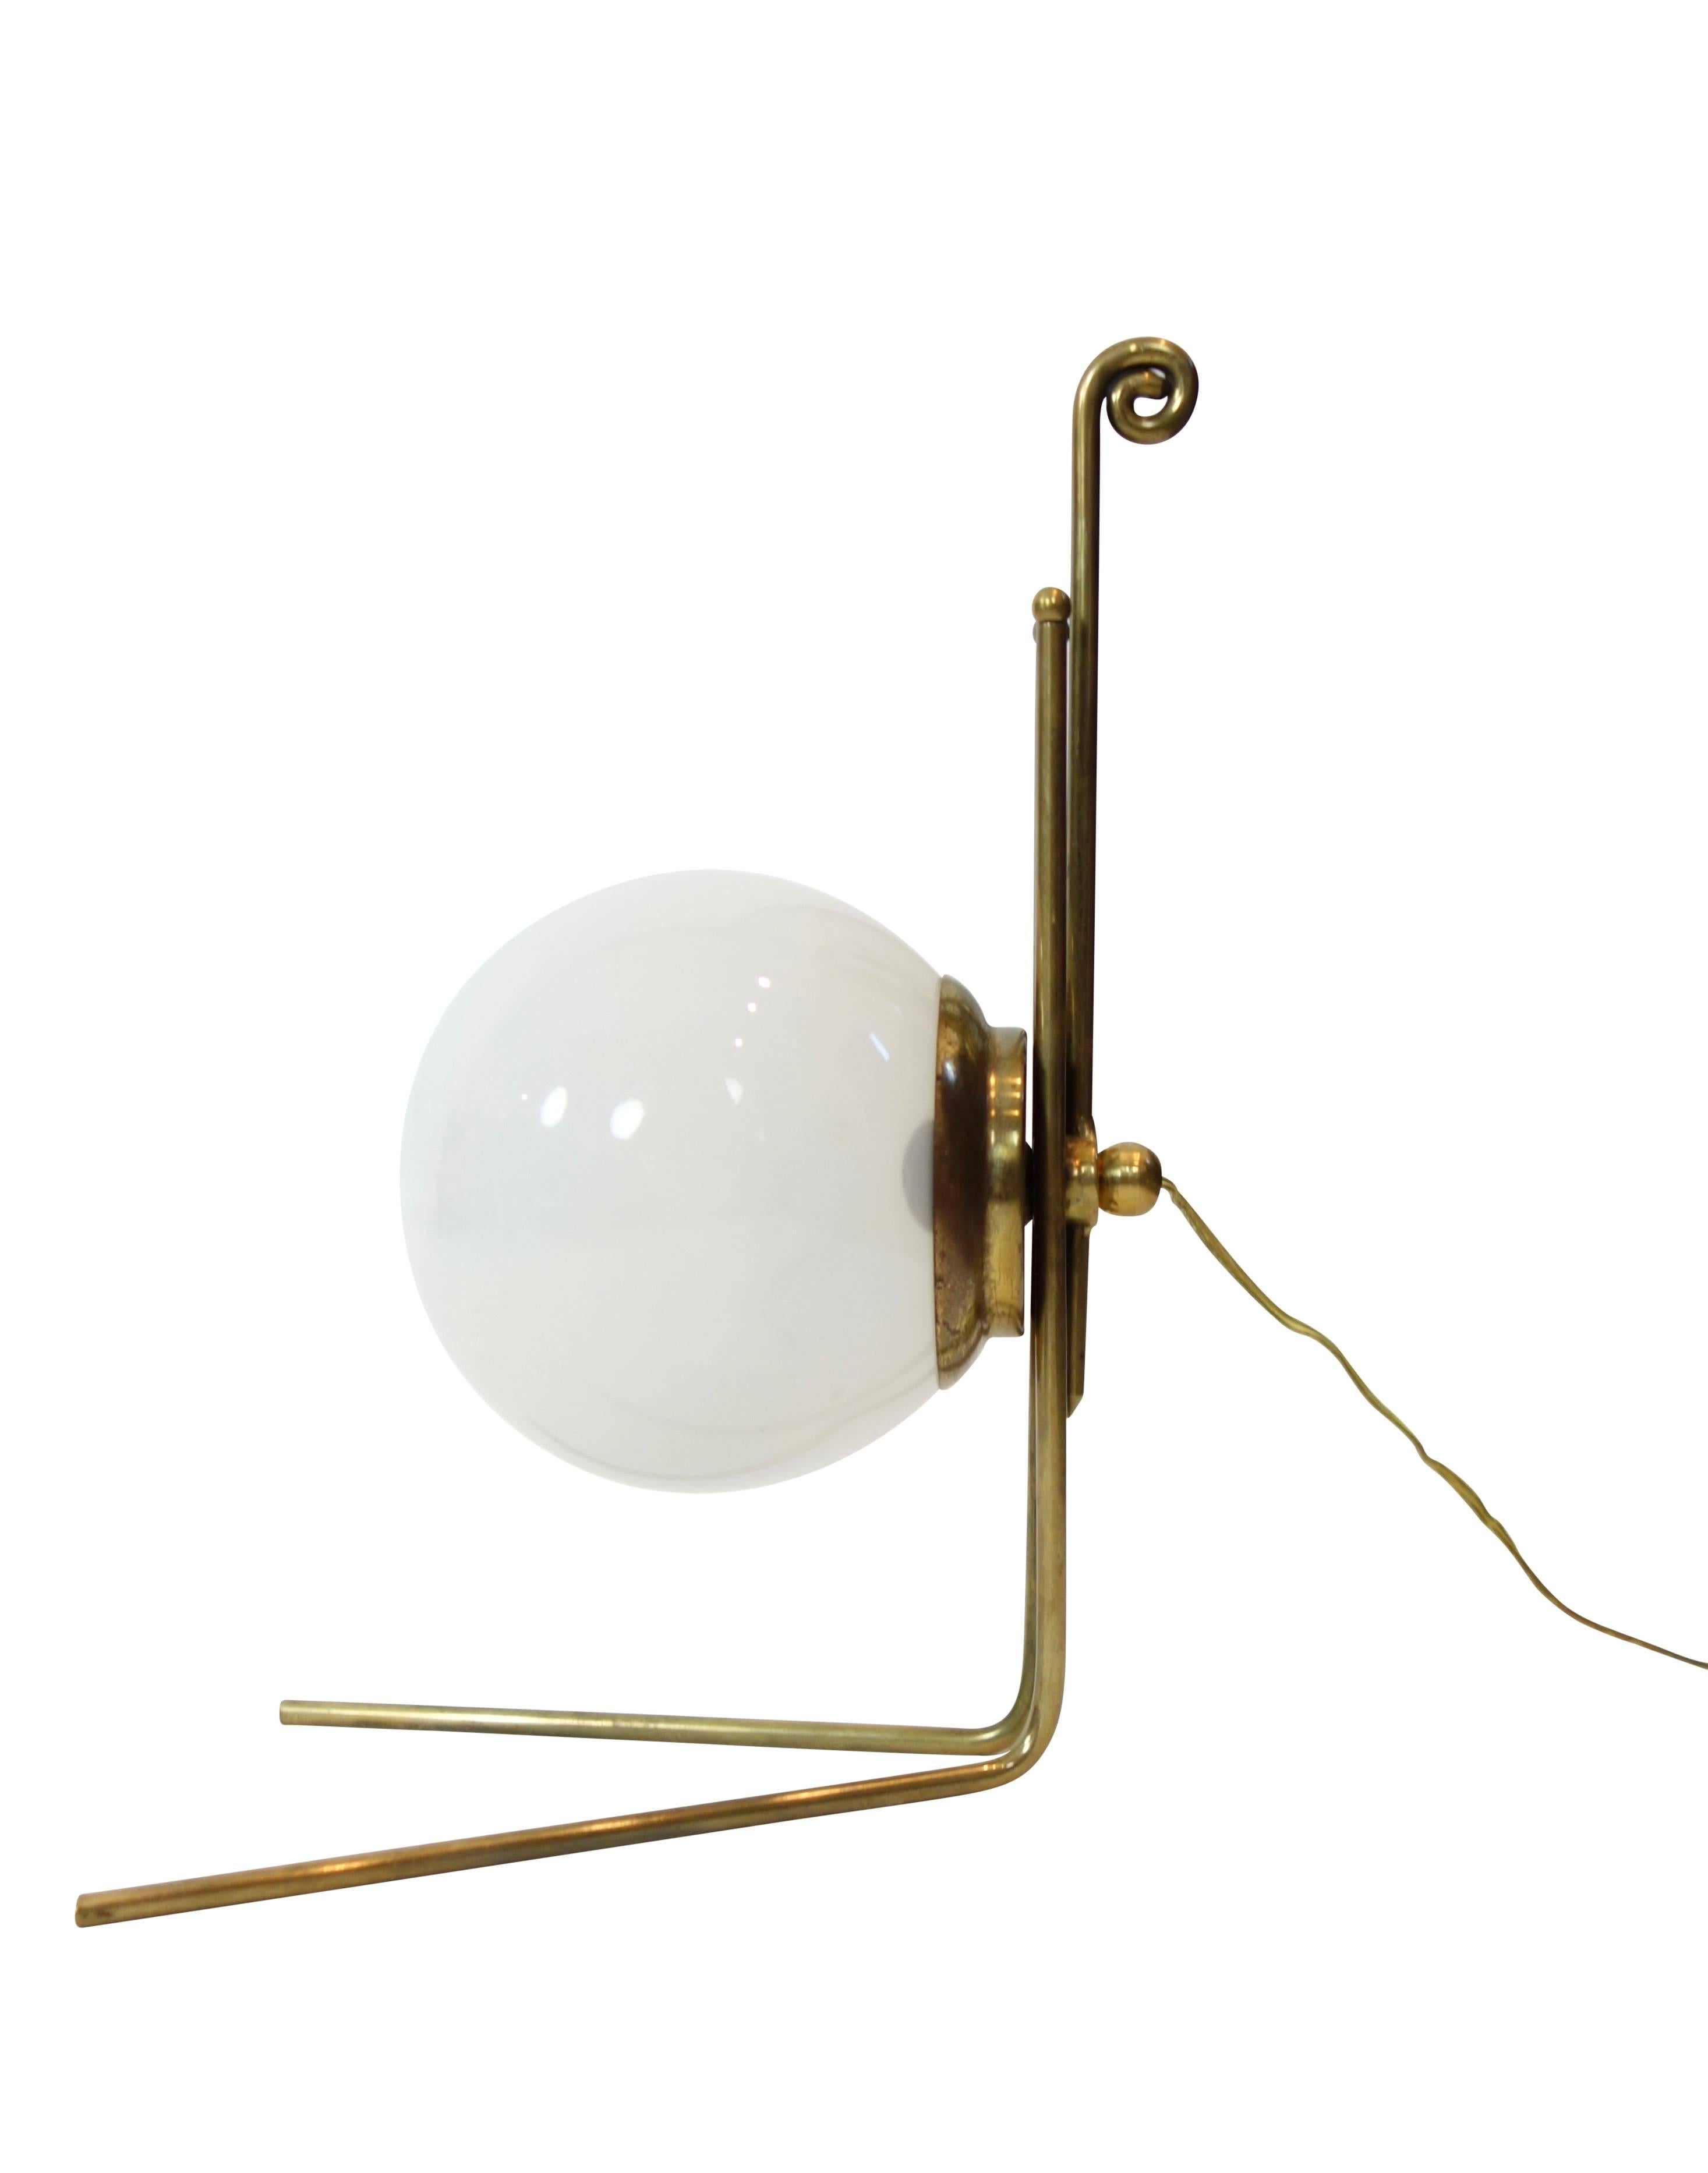 This is a unique and lovely French table lamp, circa 1930. A milk glass globe is supported by a dainty brass base that takes the form of a fiddlehead fern at the very top.